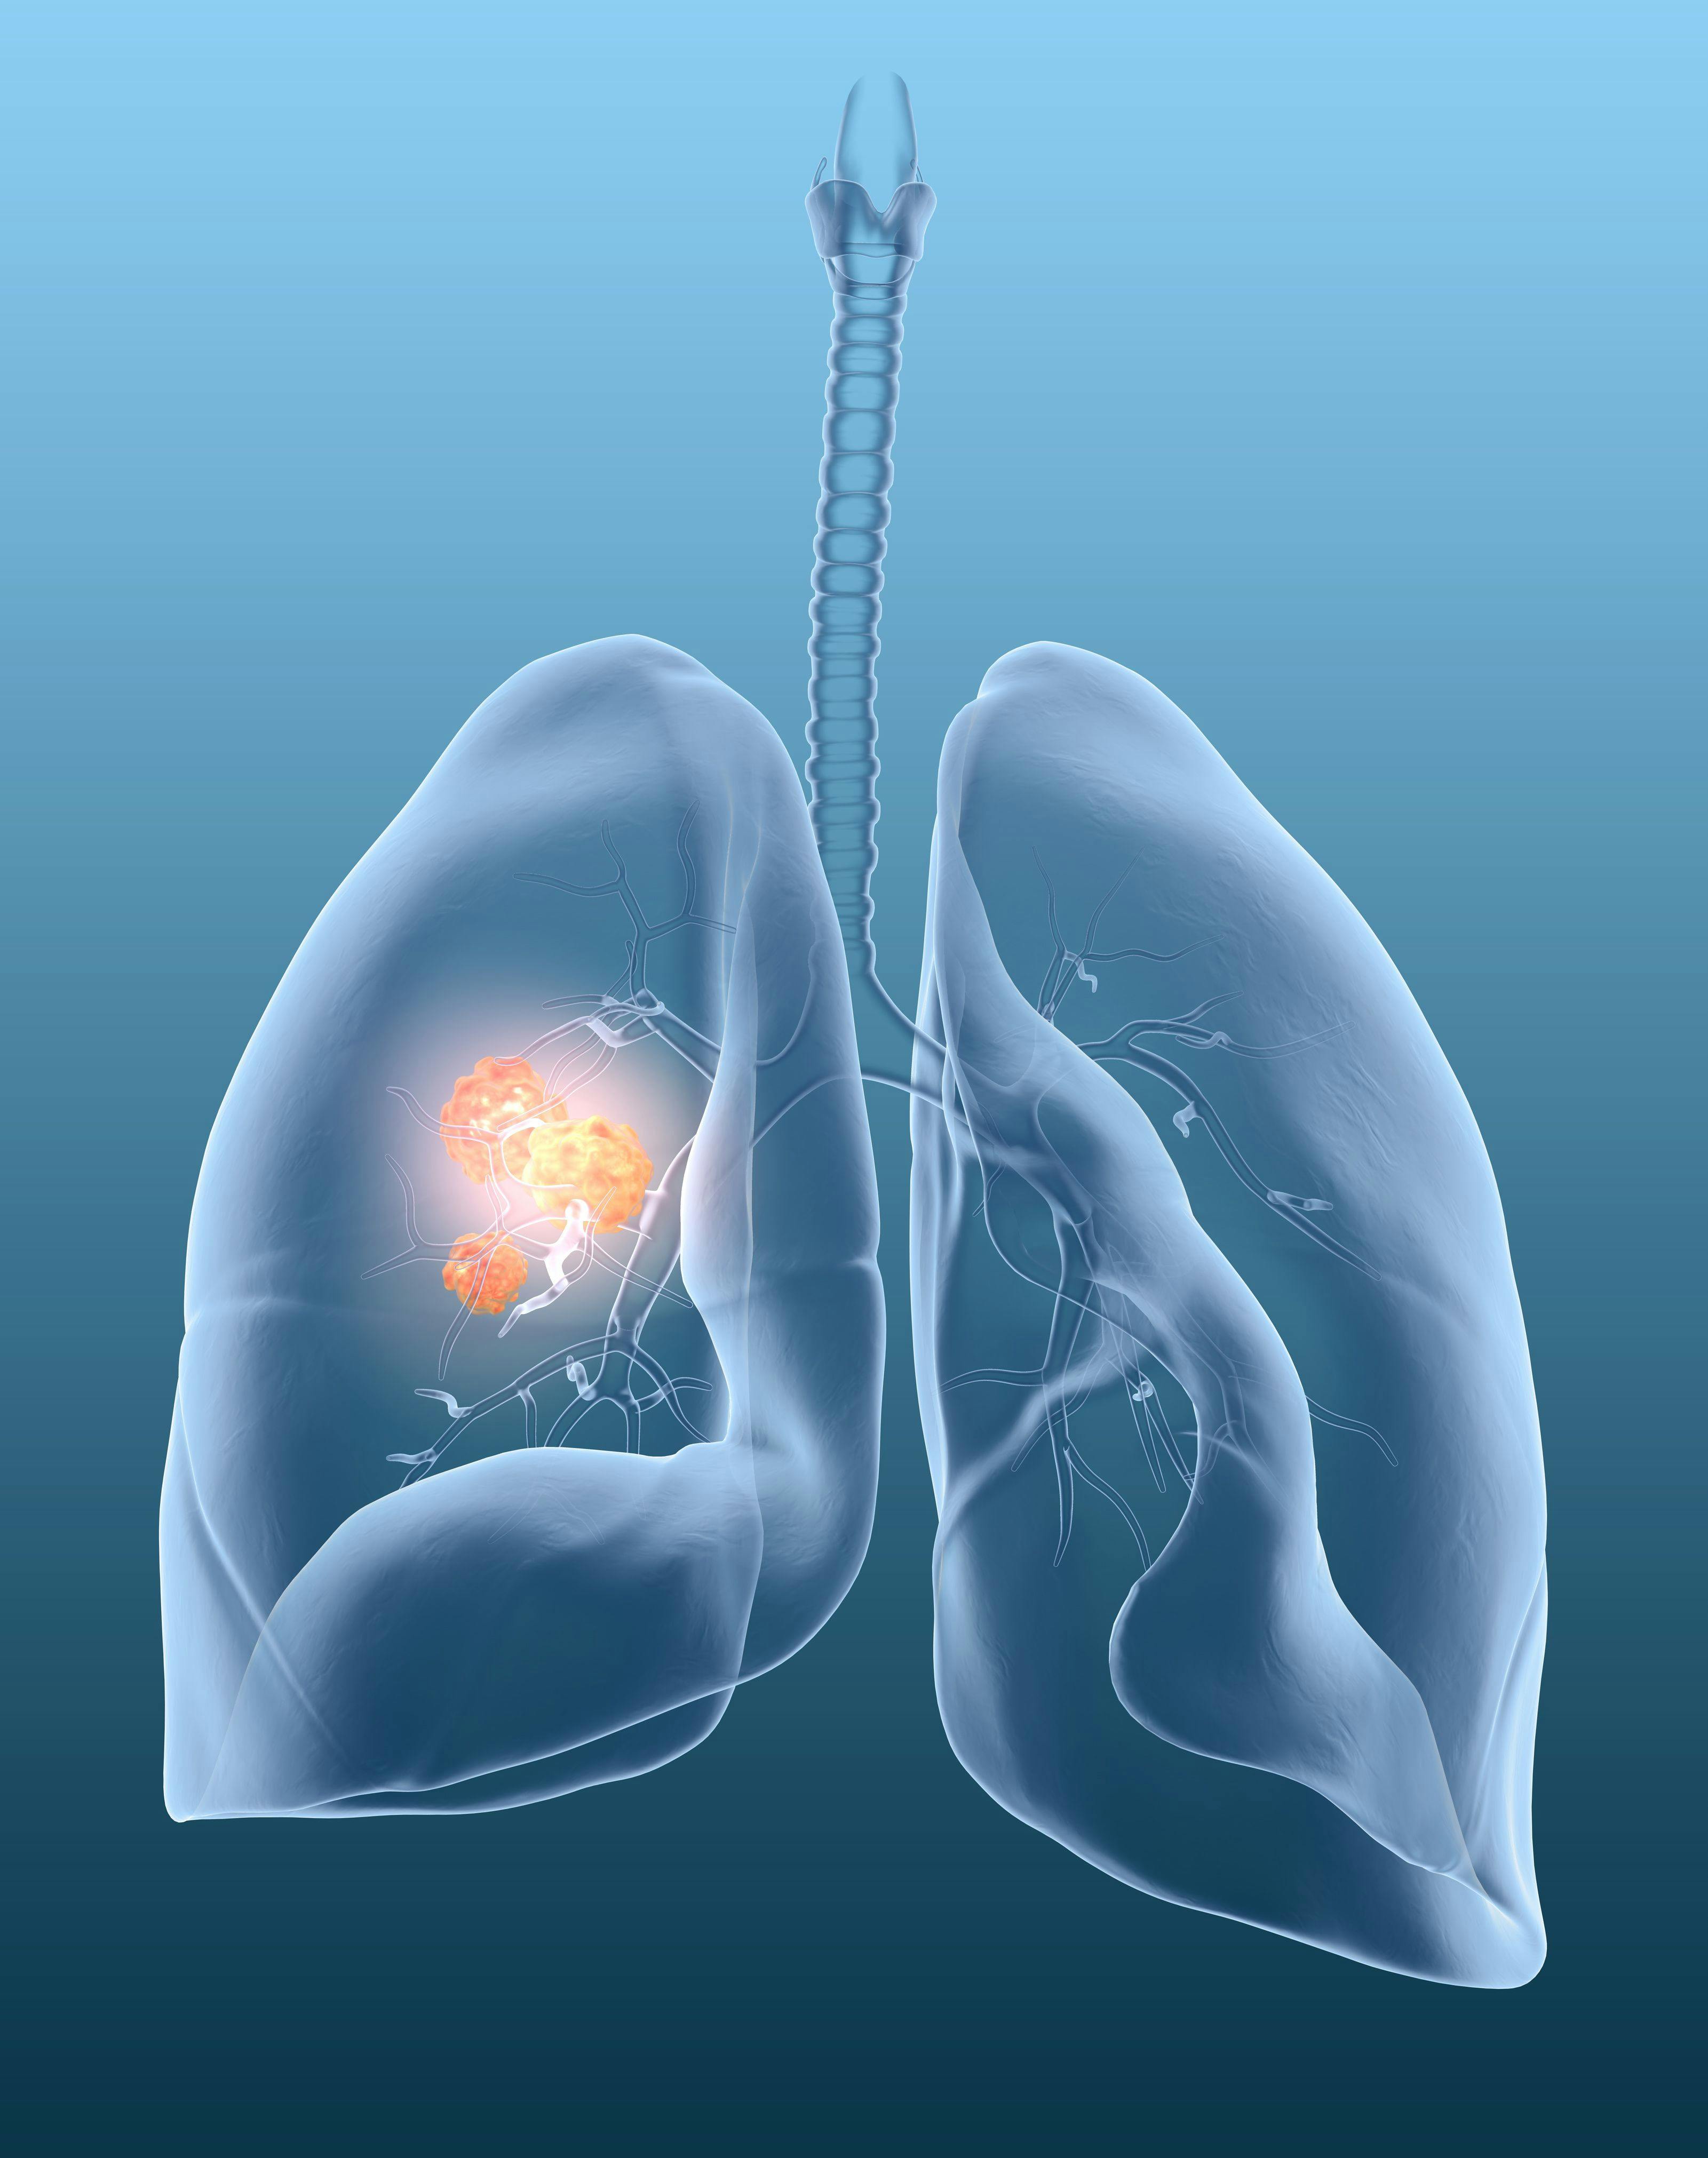 FDA Approves Pralsetinib for Treatment of Adults with Metastatic RET Fusion-Positive NSCLC